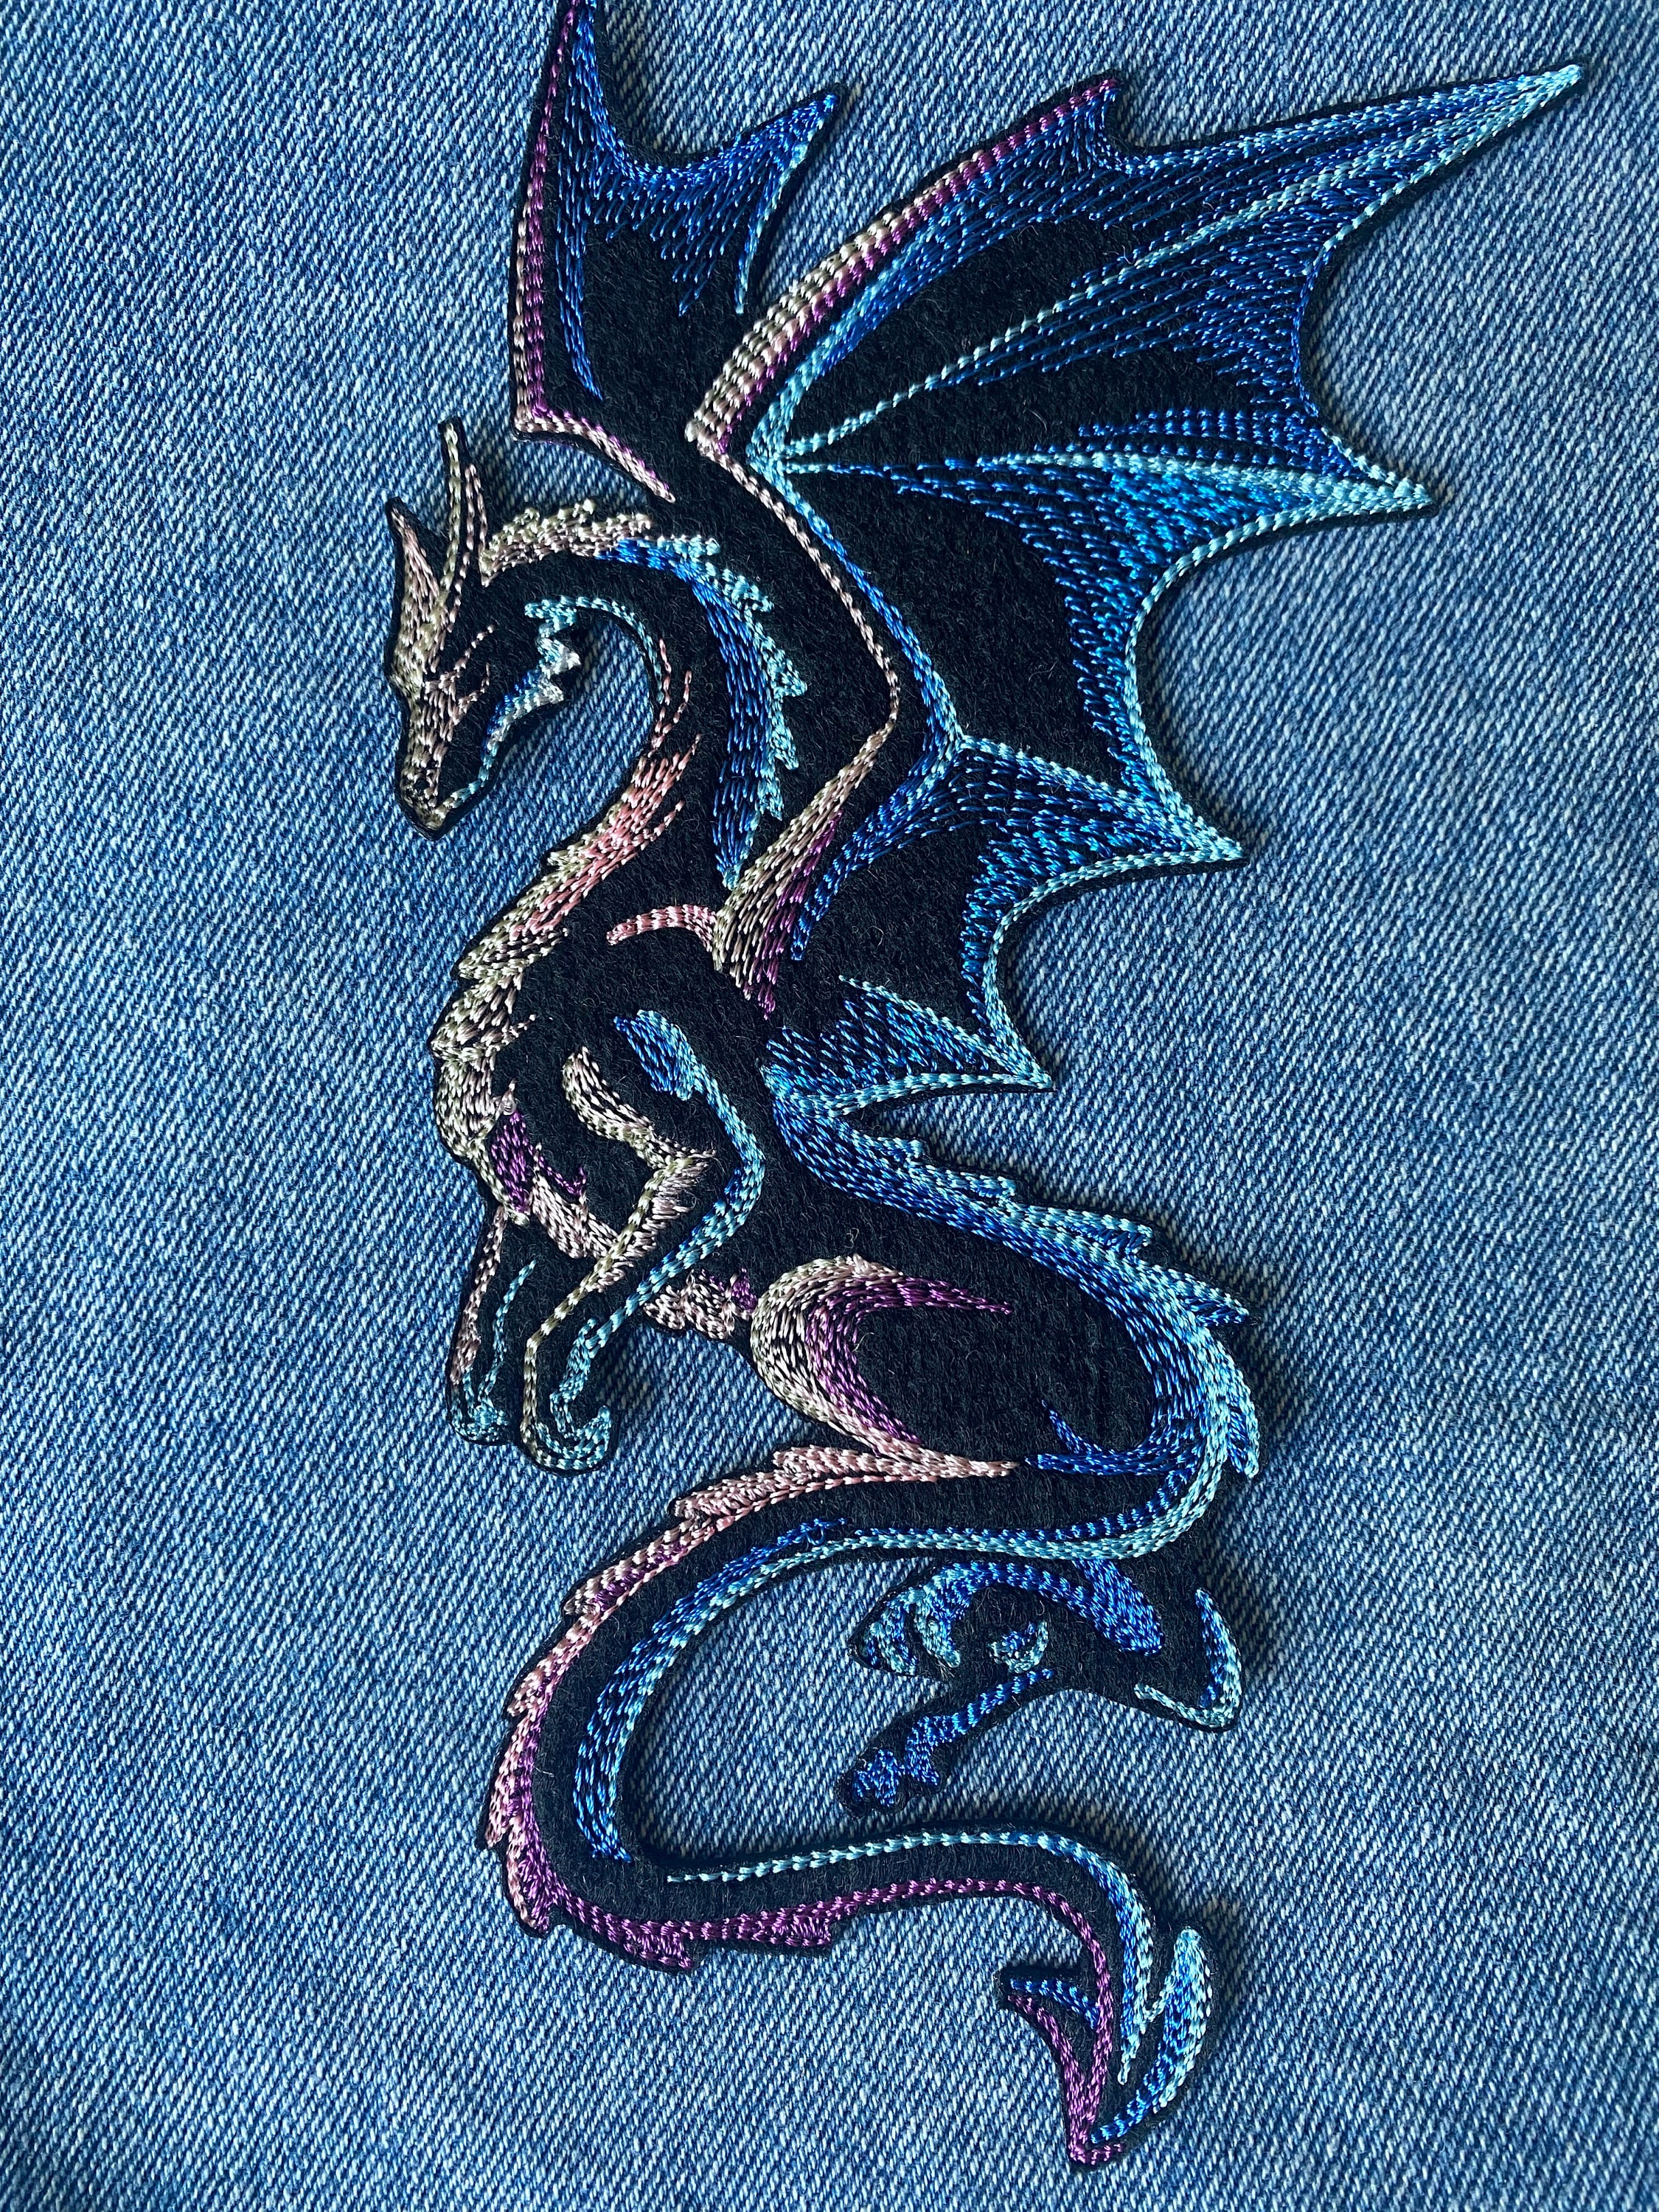  EXCEART Sewing Dragon Patches Clothing Repair Patch DIY Clothes  Patches DIY Backpack Patches Embroidered Patches Sew on Patches for  Clothing Patches DIY Supplies Nylon Accessories Cartoon : Everything Else